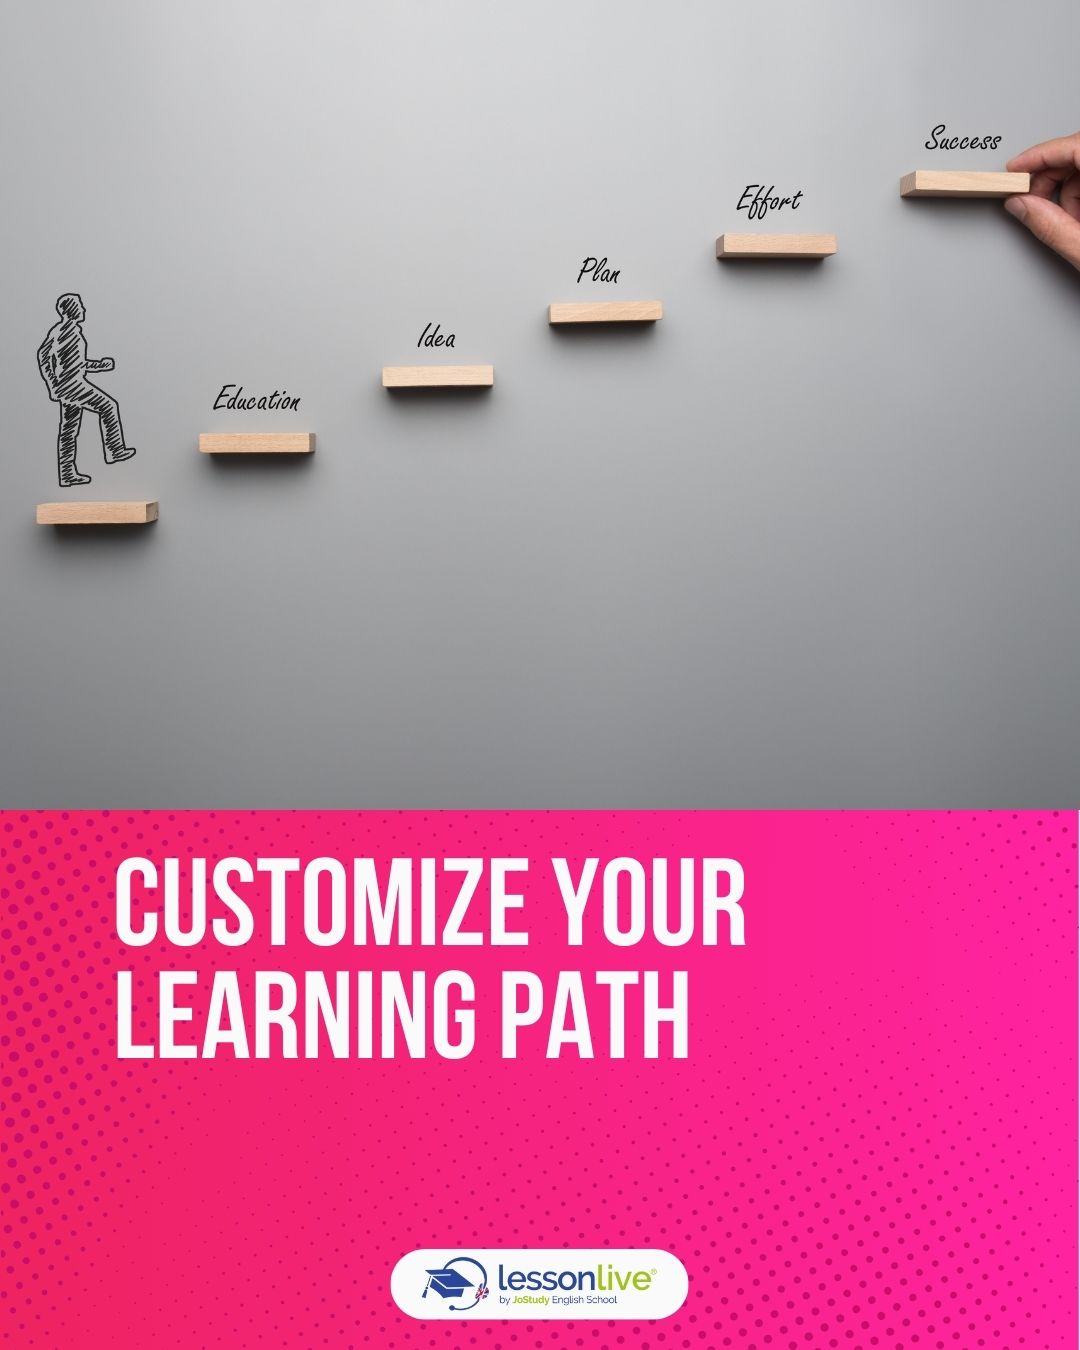 LESSON LIVE - ONLINE ENGLISH CURSES - CUSTOMIZE YOUR LEARNING PATH